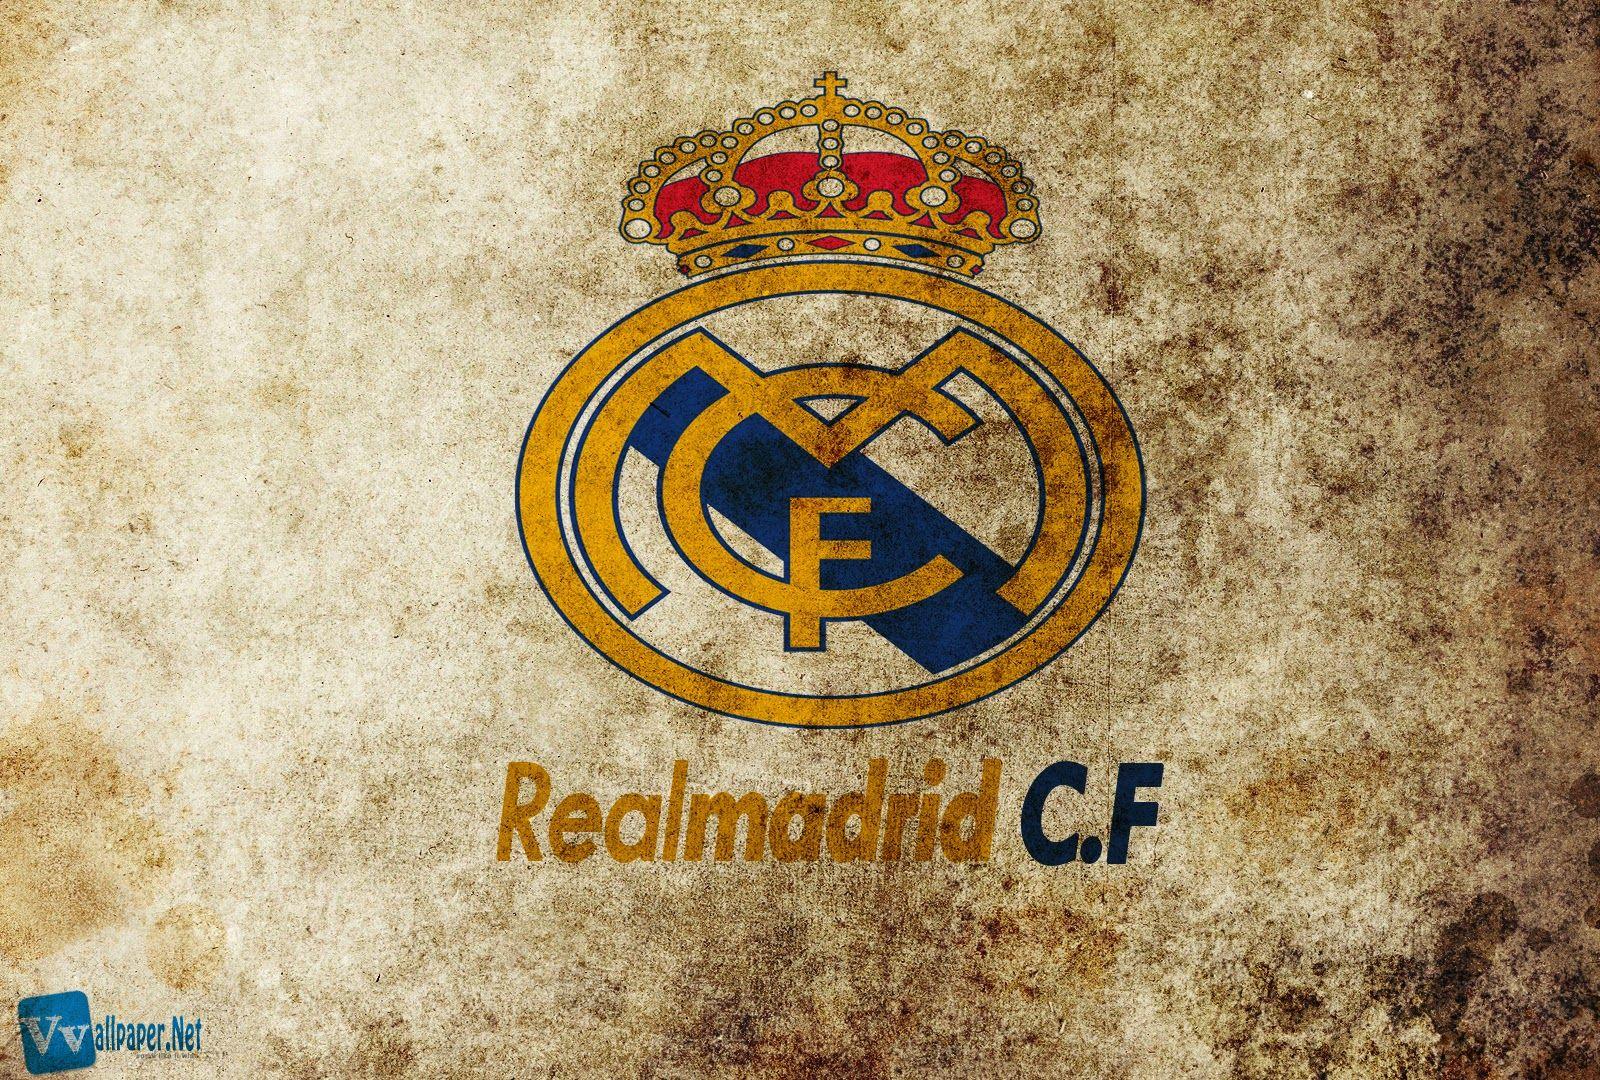 Real Madrid CF Latest Image. Beautiful image HD Picture